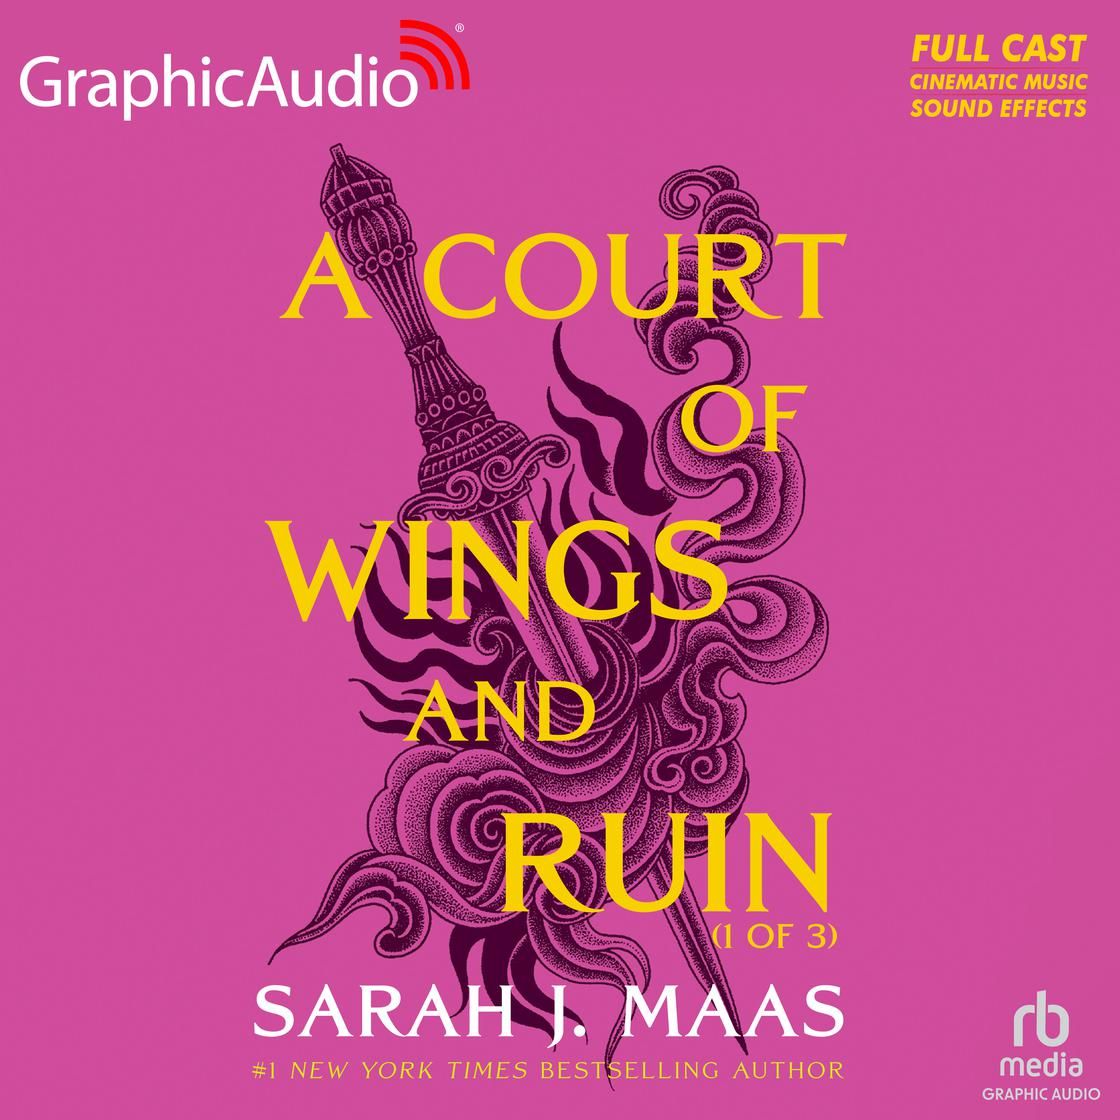 A Court of Wings and Ruin (1 of 3) [Dramatized Adaptation] | Libro.fm (US)